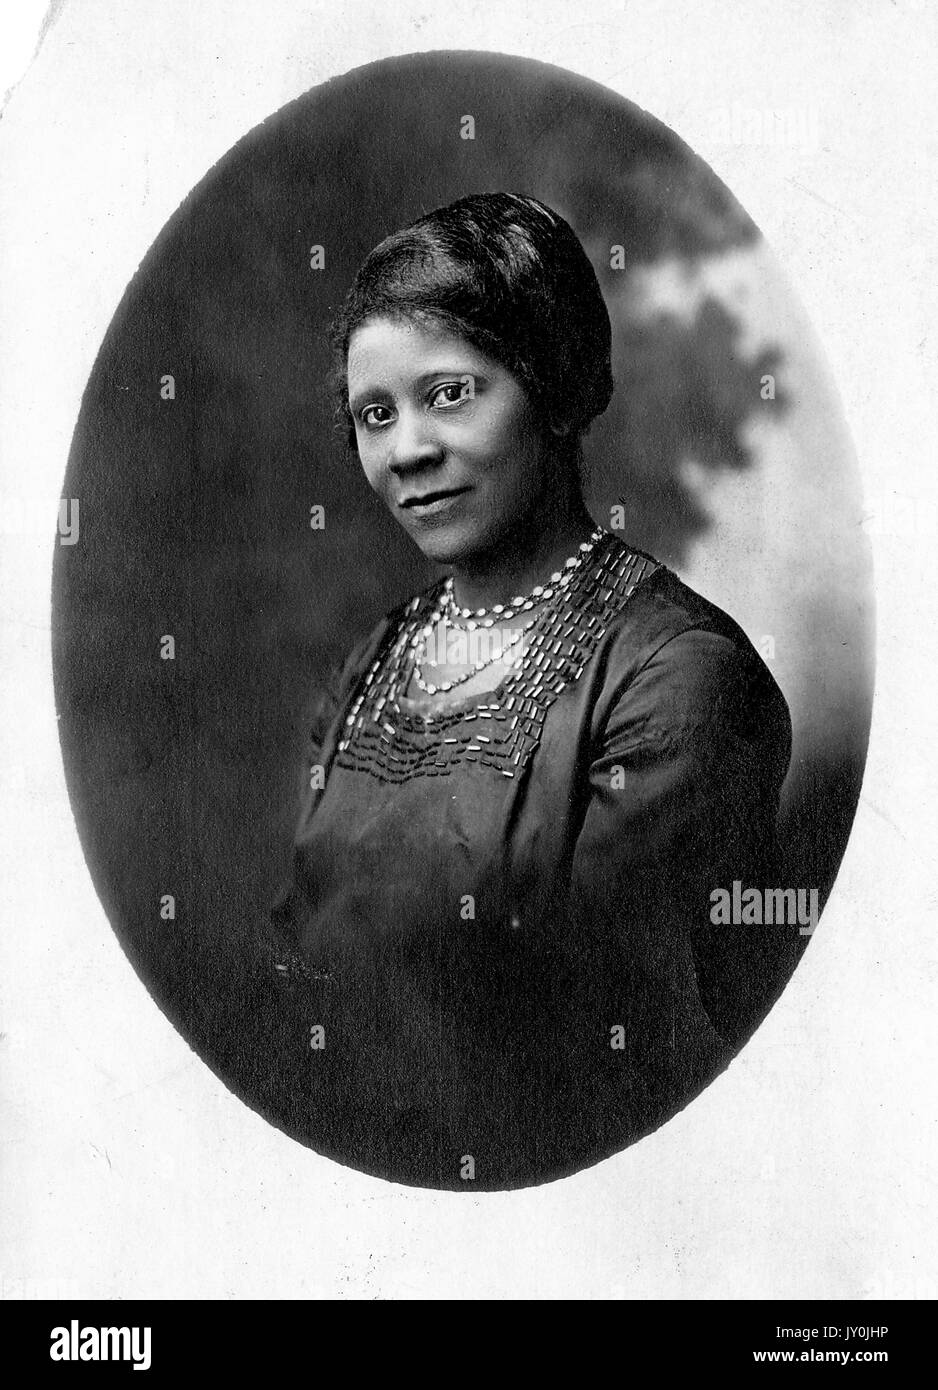 Oval half length portrait of an African American woman, she is wearing a dark shirt and light colored necklaces, 1915. Stock Photo